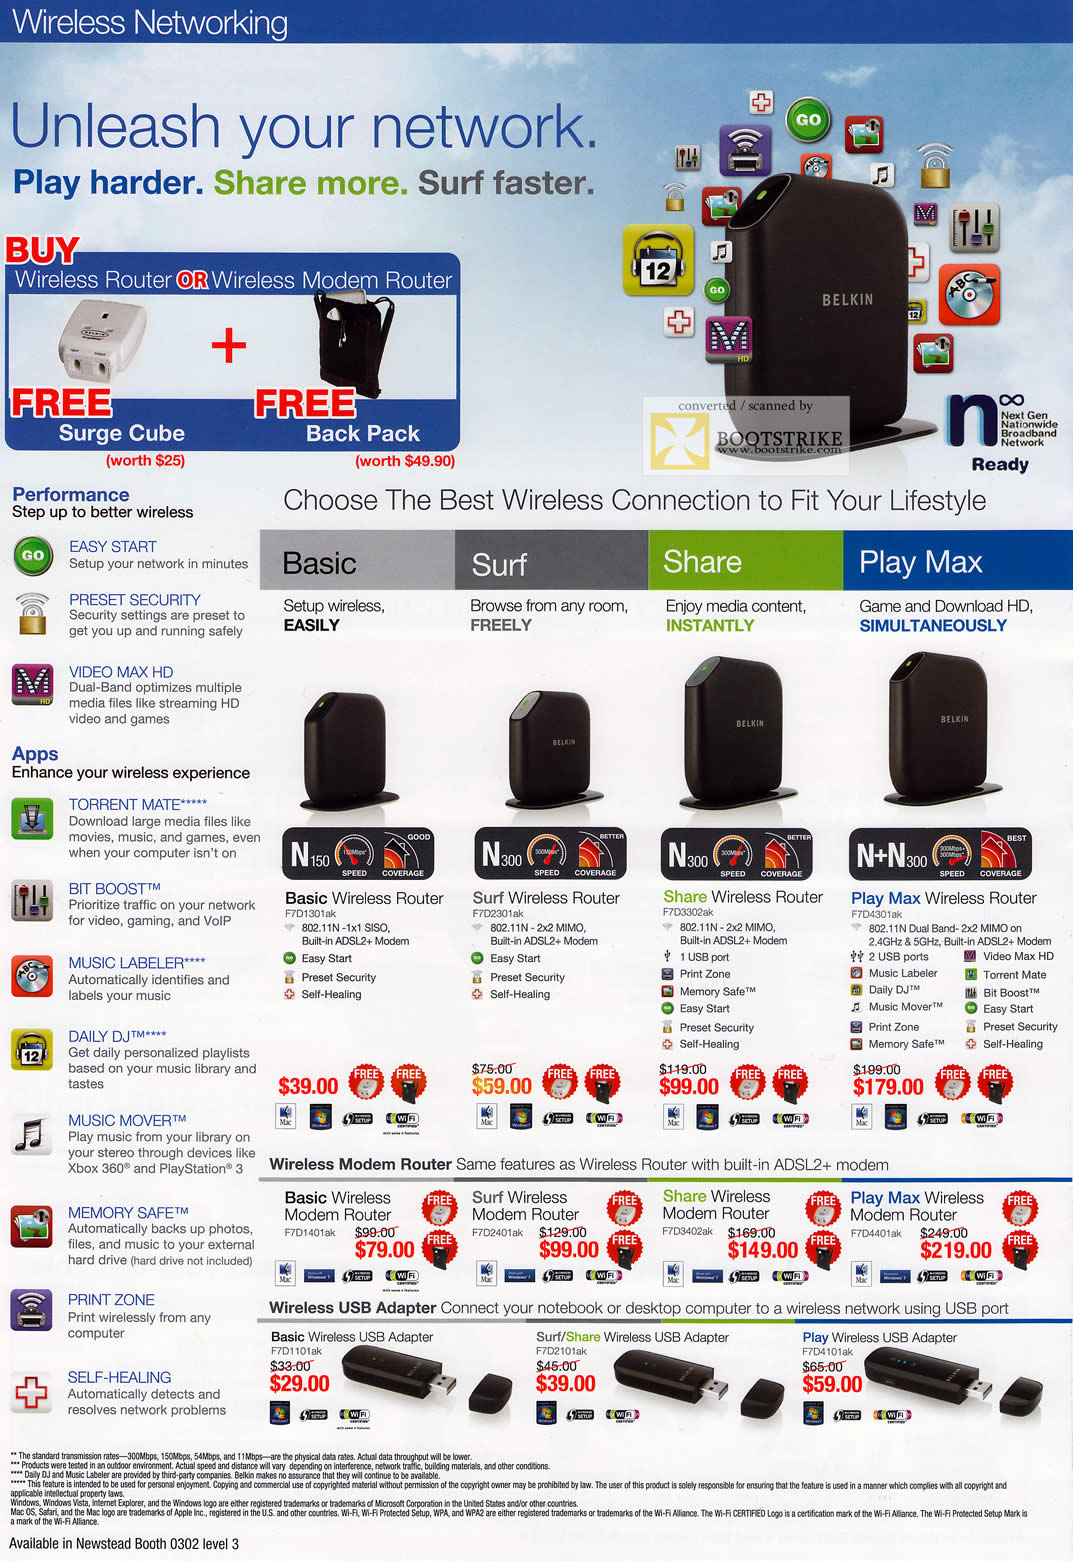 PC Show 2011 price list image brochure of Belkin Wireless Networking Basic Surf Share Play Max Router Model USB Adapter